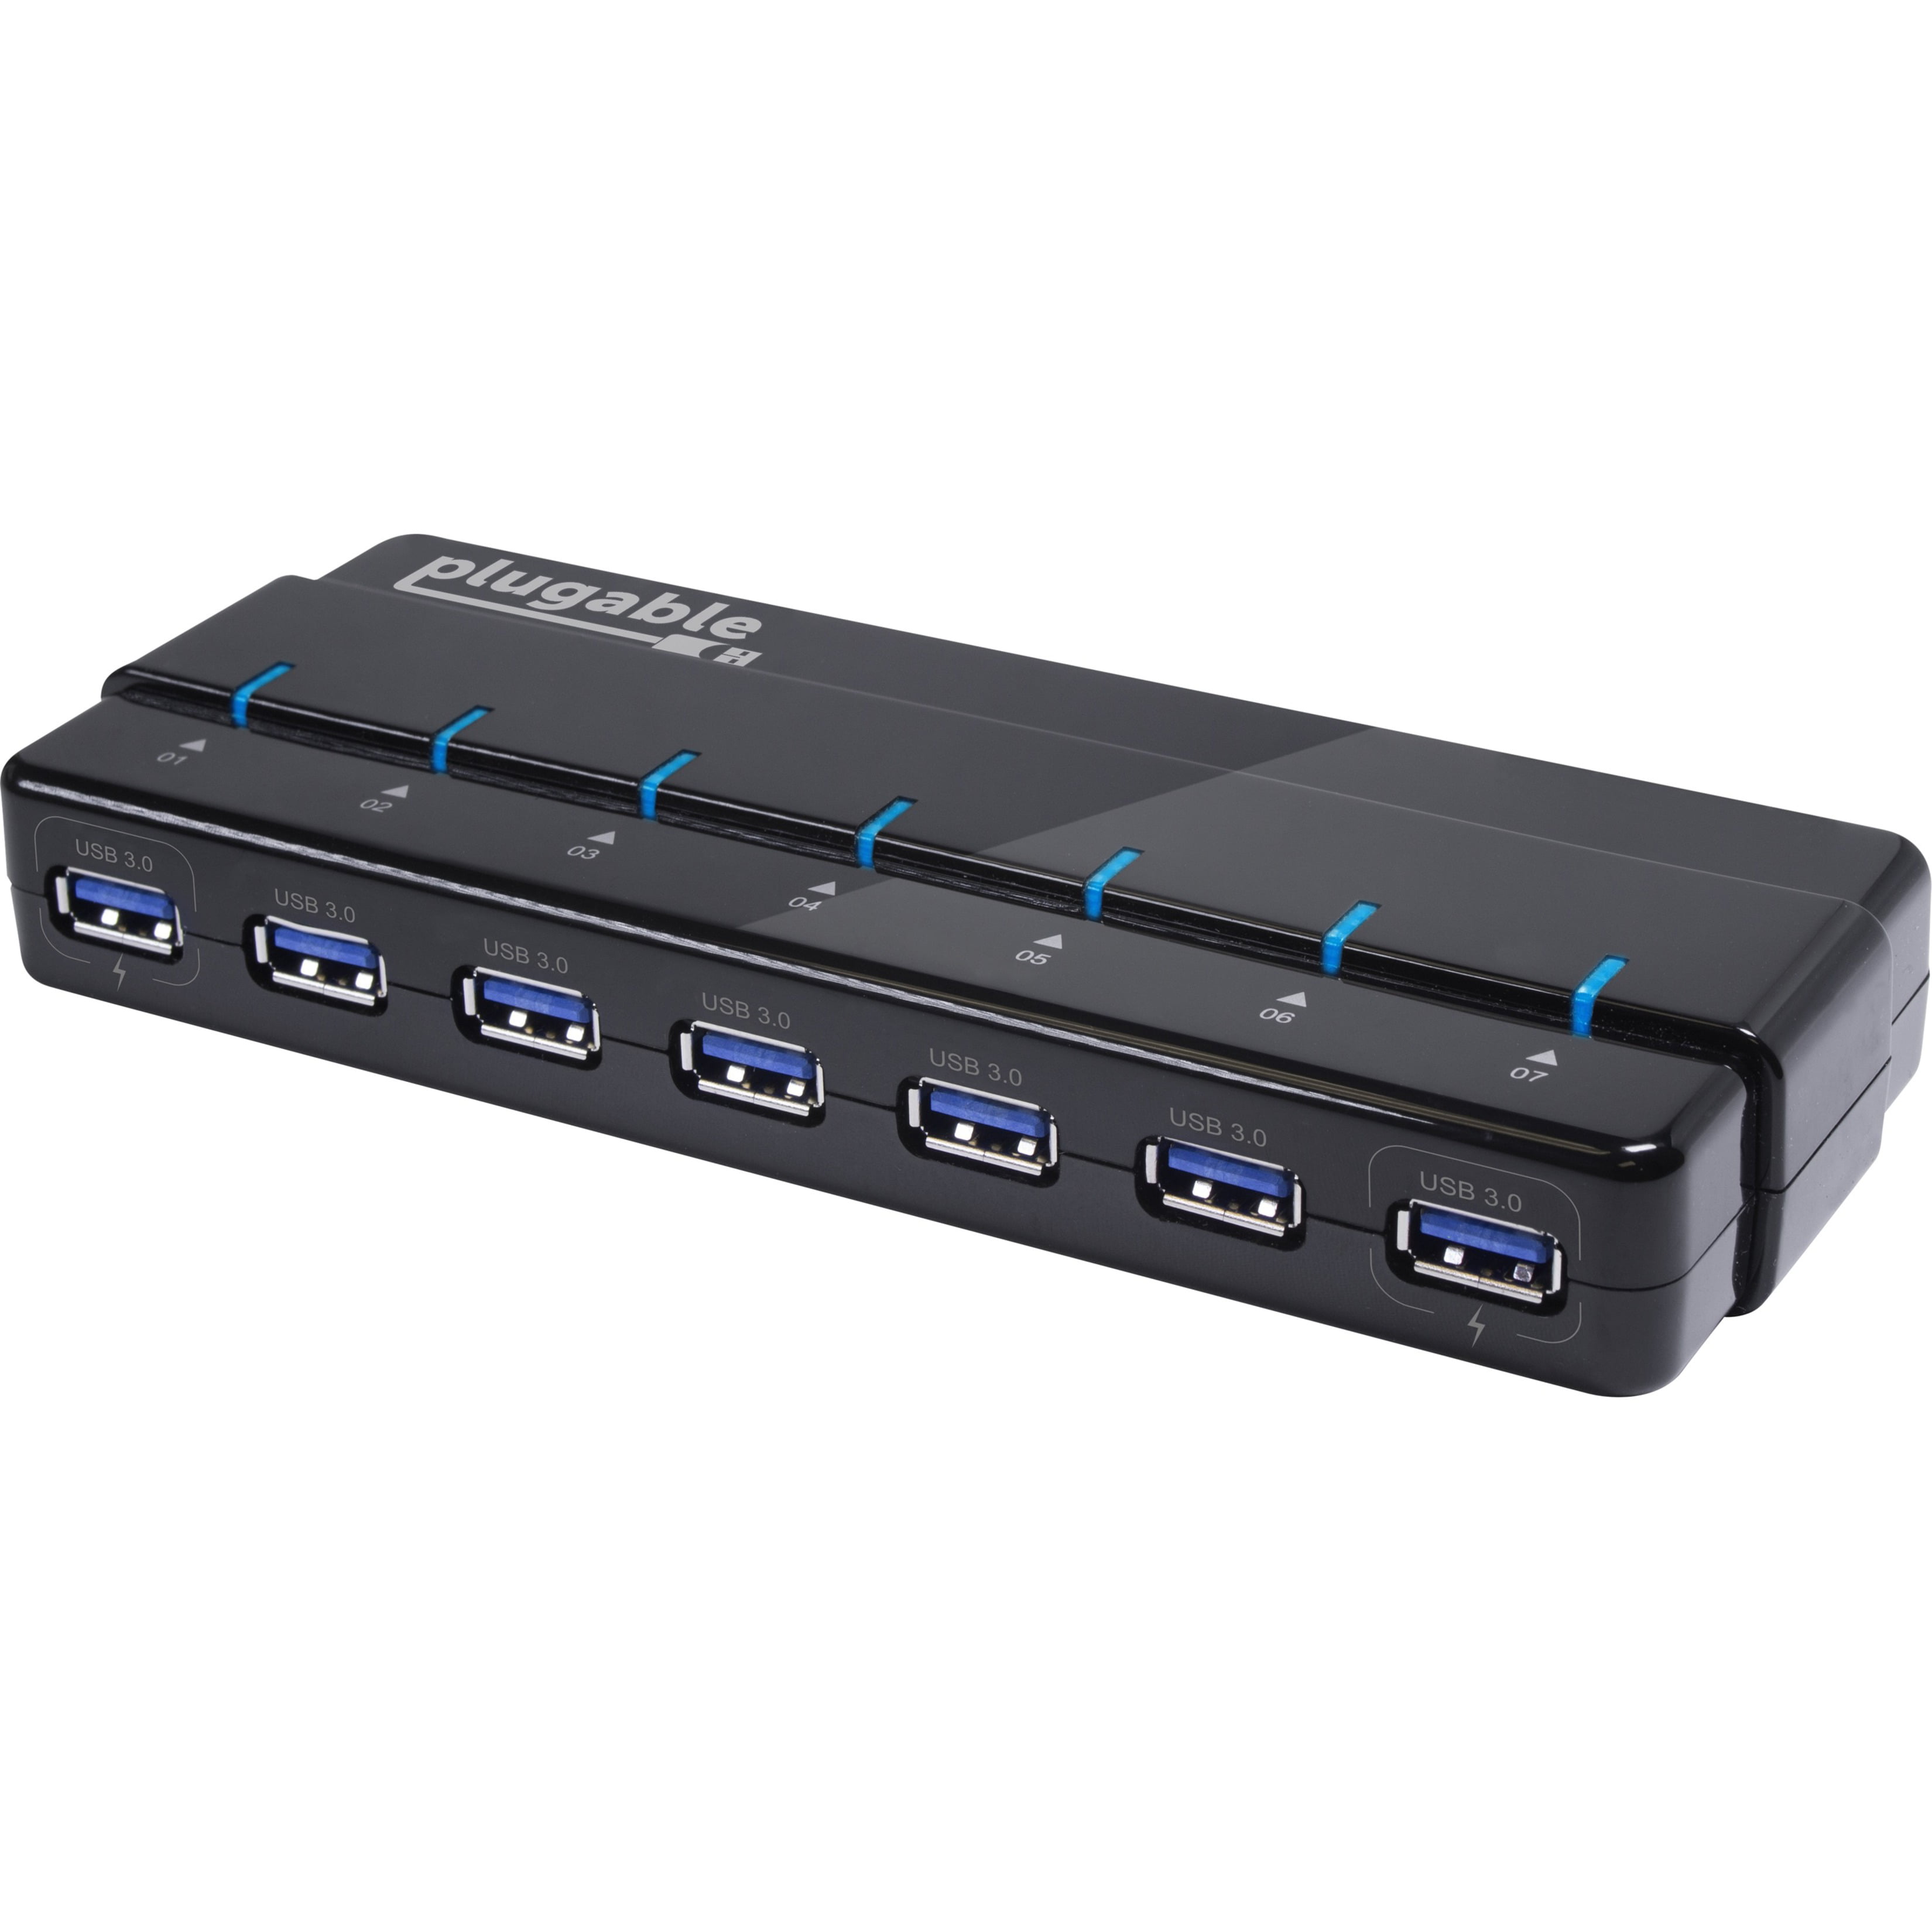 Plugable 7 port USB 3.0 hub - 25W Powered USB HUB with Two BC 1.2 Charging  ports for Android, Apple iOS, and Windows Mobile Devices 